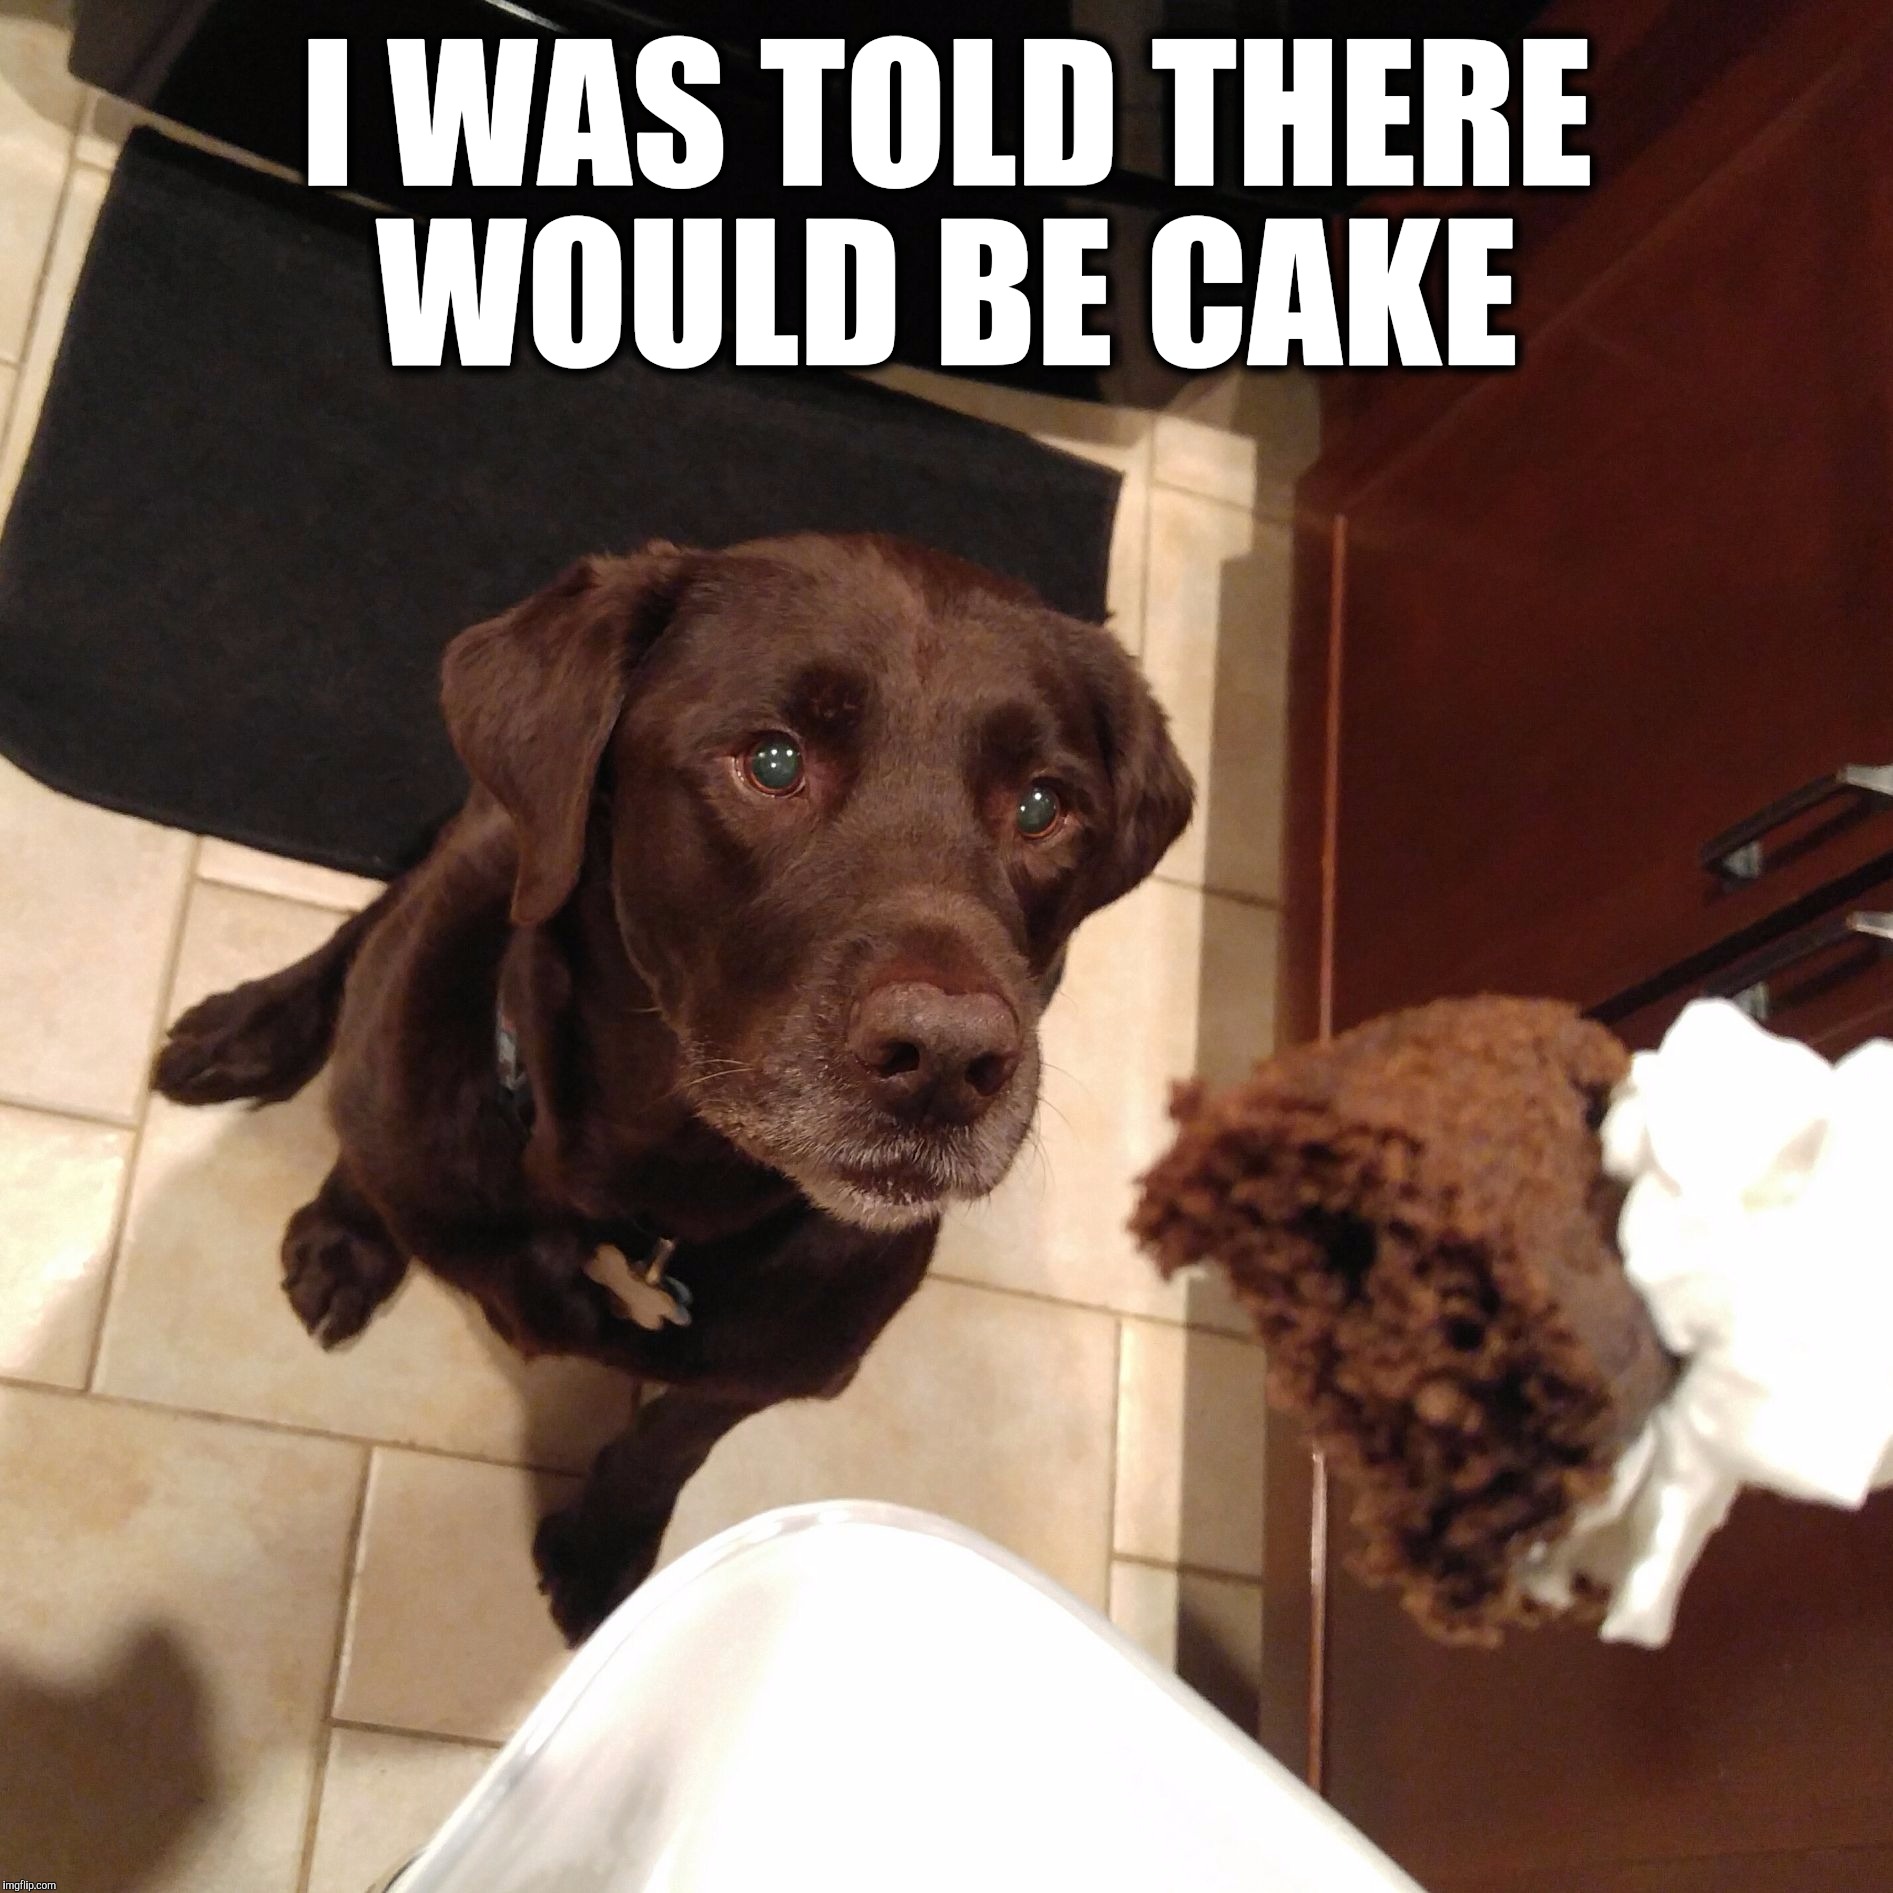 I was told there would be cake  | I WAS TOLD THERE WOULD BE CAKE | image tagged in chuckie the chocolate lab,cake,dog meme,funny dogs,cute,labrador | made w/ Imgflip meme maker